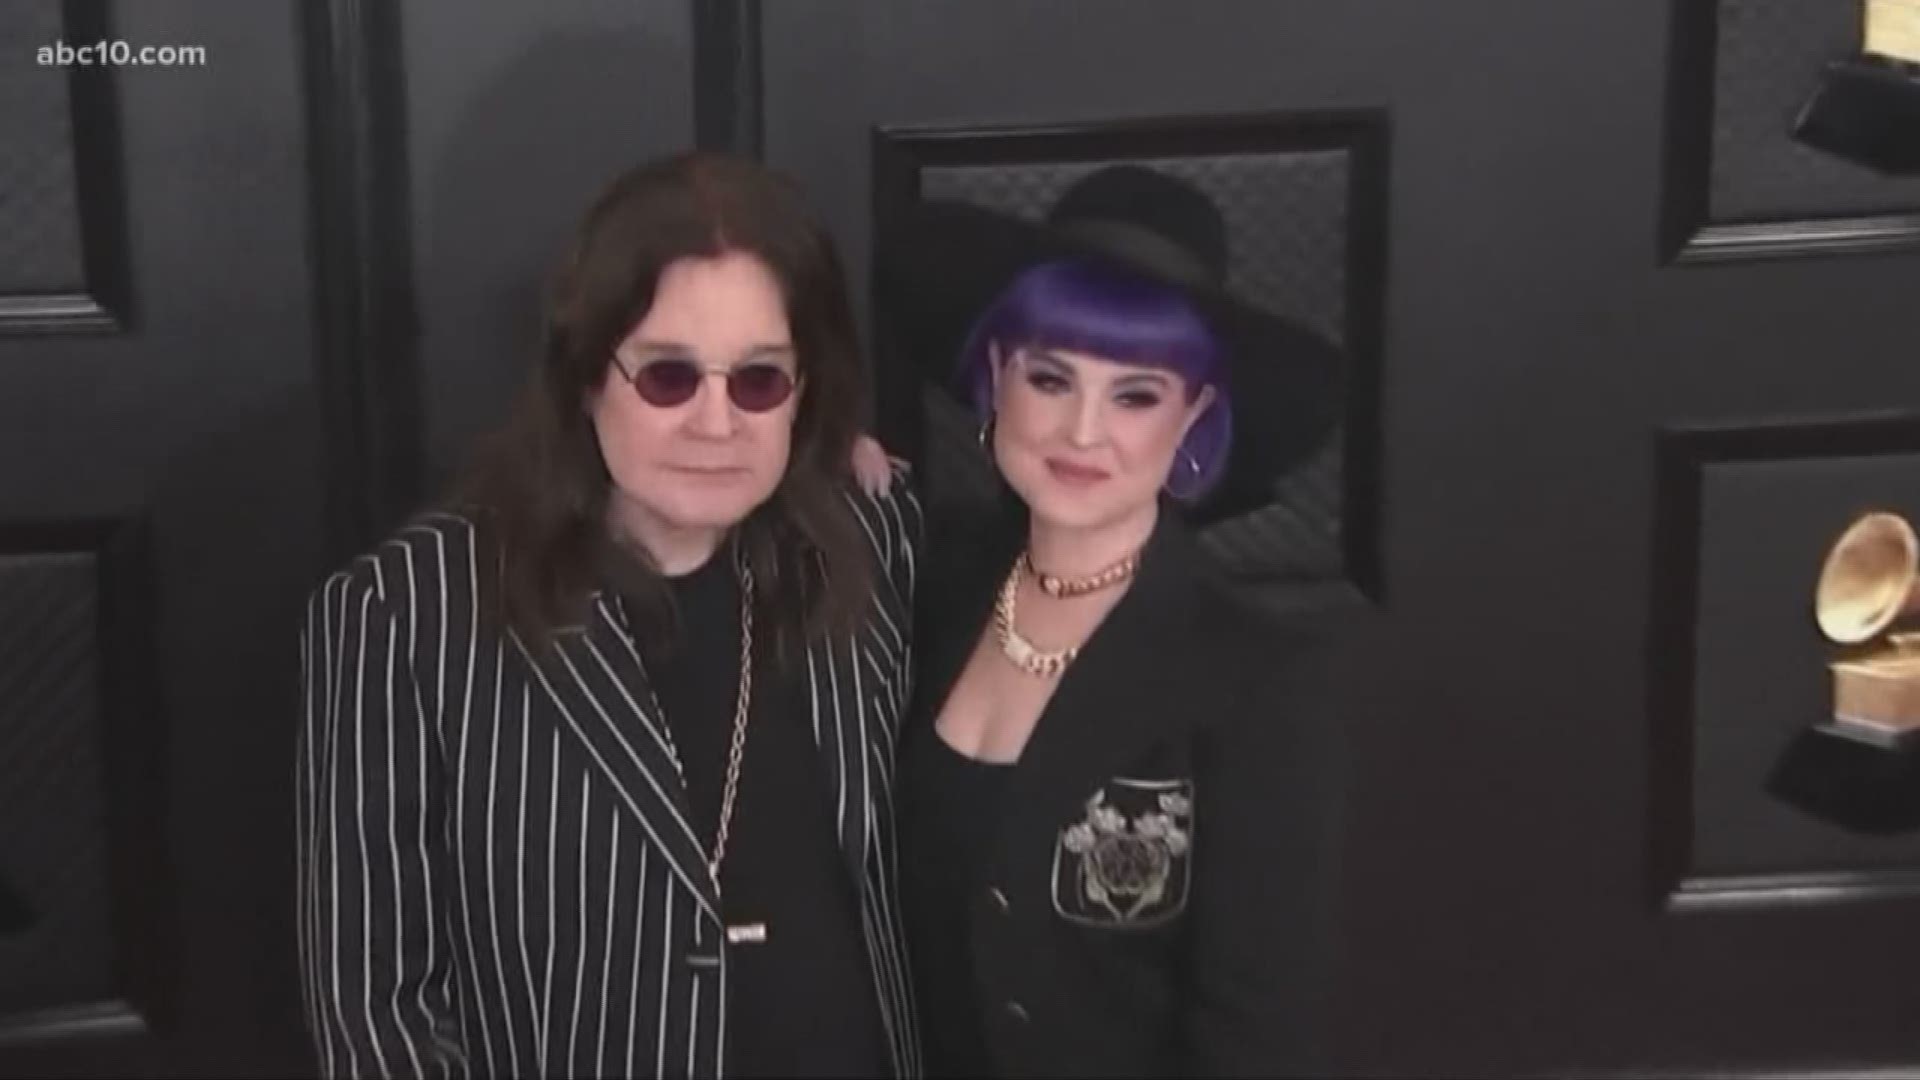 Ozzy Osbourne canceled the North American leg of his 2020 tour due to his fight with Parkinson's Disease; Tom Holland talks to Mark at the "Onward" premiere in LA.